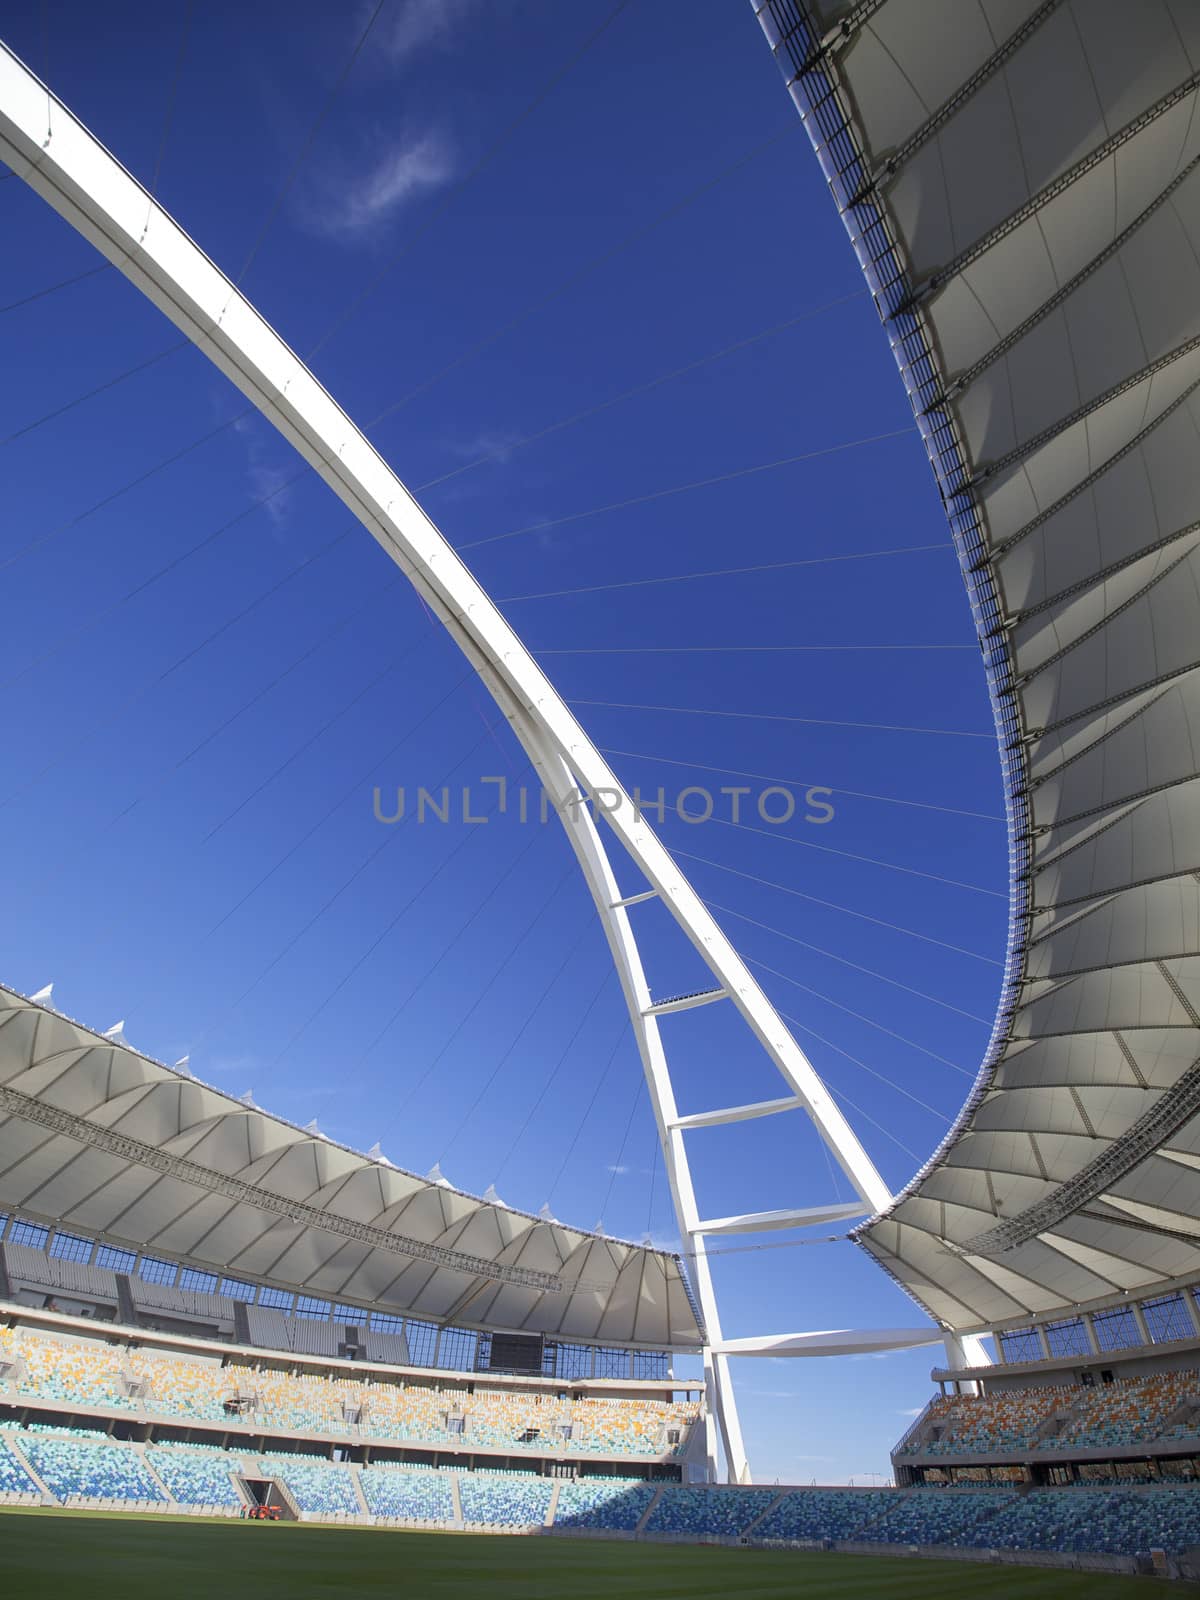 New Stadiums Built in Preparation for the Soccer World cup to be Held in South Africa. I
n the City of Durban the Moses Mabhida Stadium